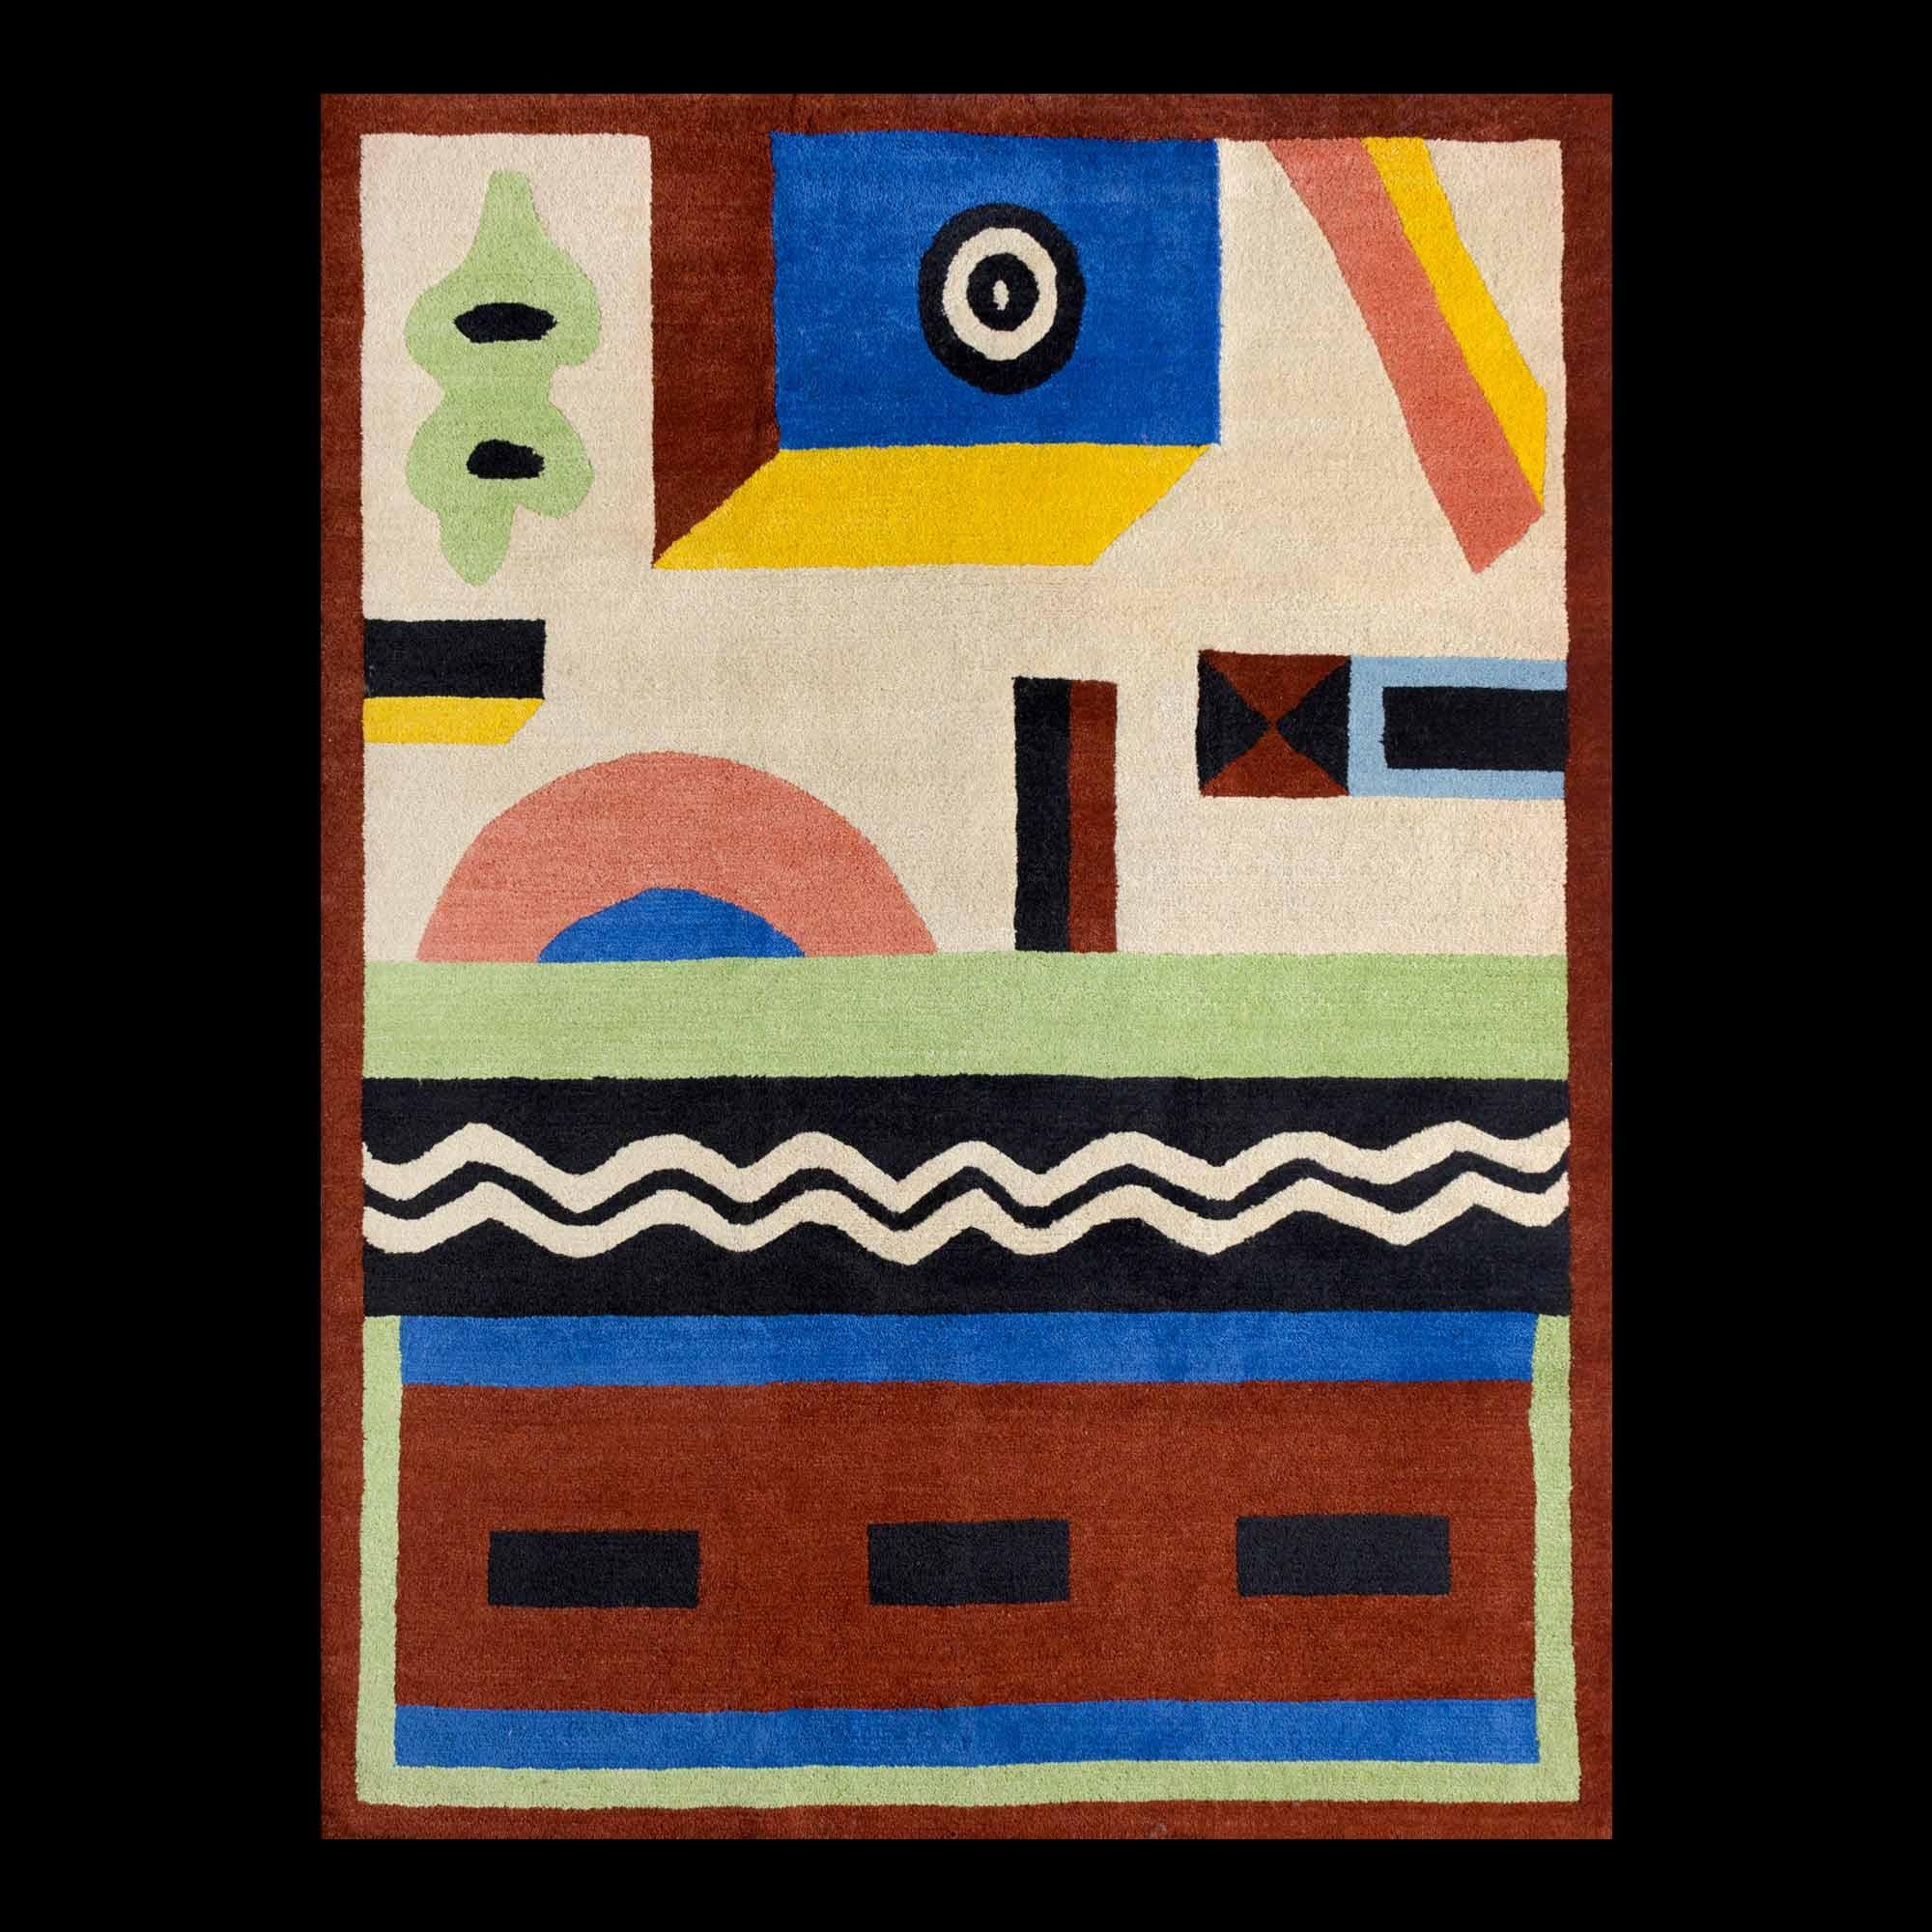 NDP46 woollen carpet by Nathalie du Pasquier for Post Design collection/Memphis

A woollen carpet handcrafted by different Nepalese artisans. Made in a limited edition of 36 signed, numbered examples.

As the carpet is made by hand, there are